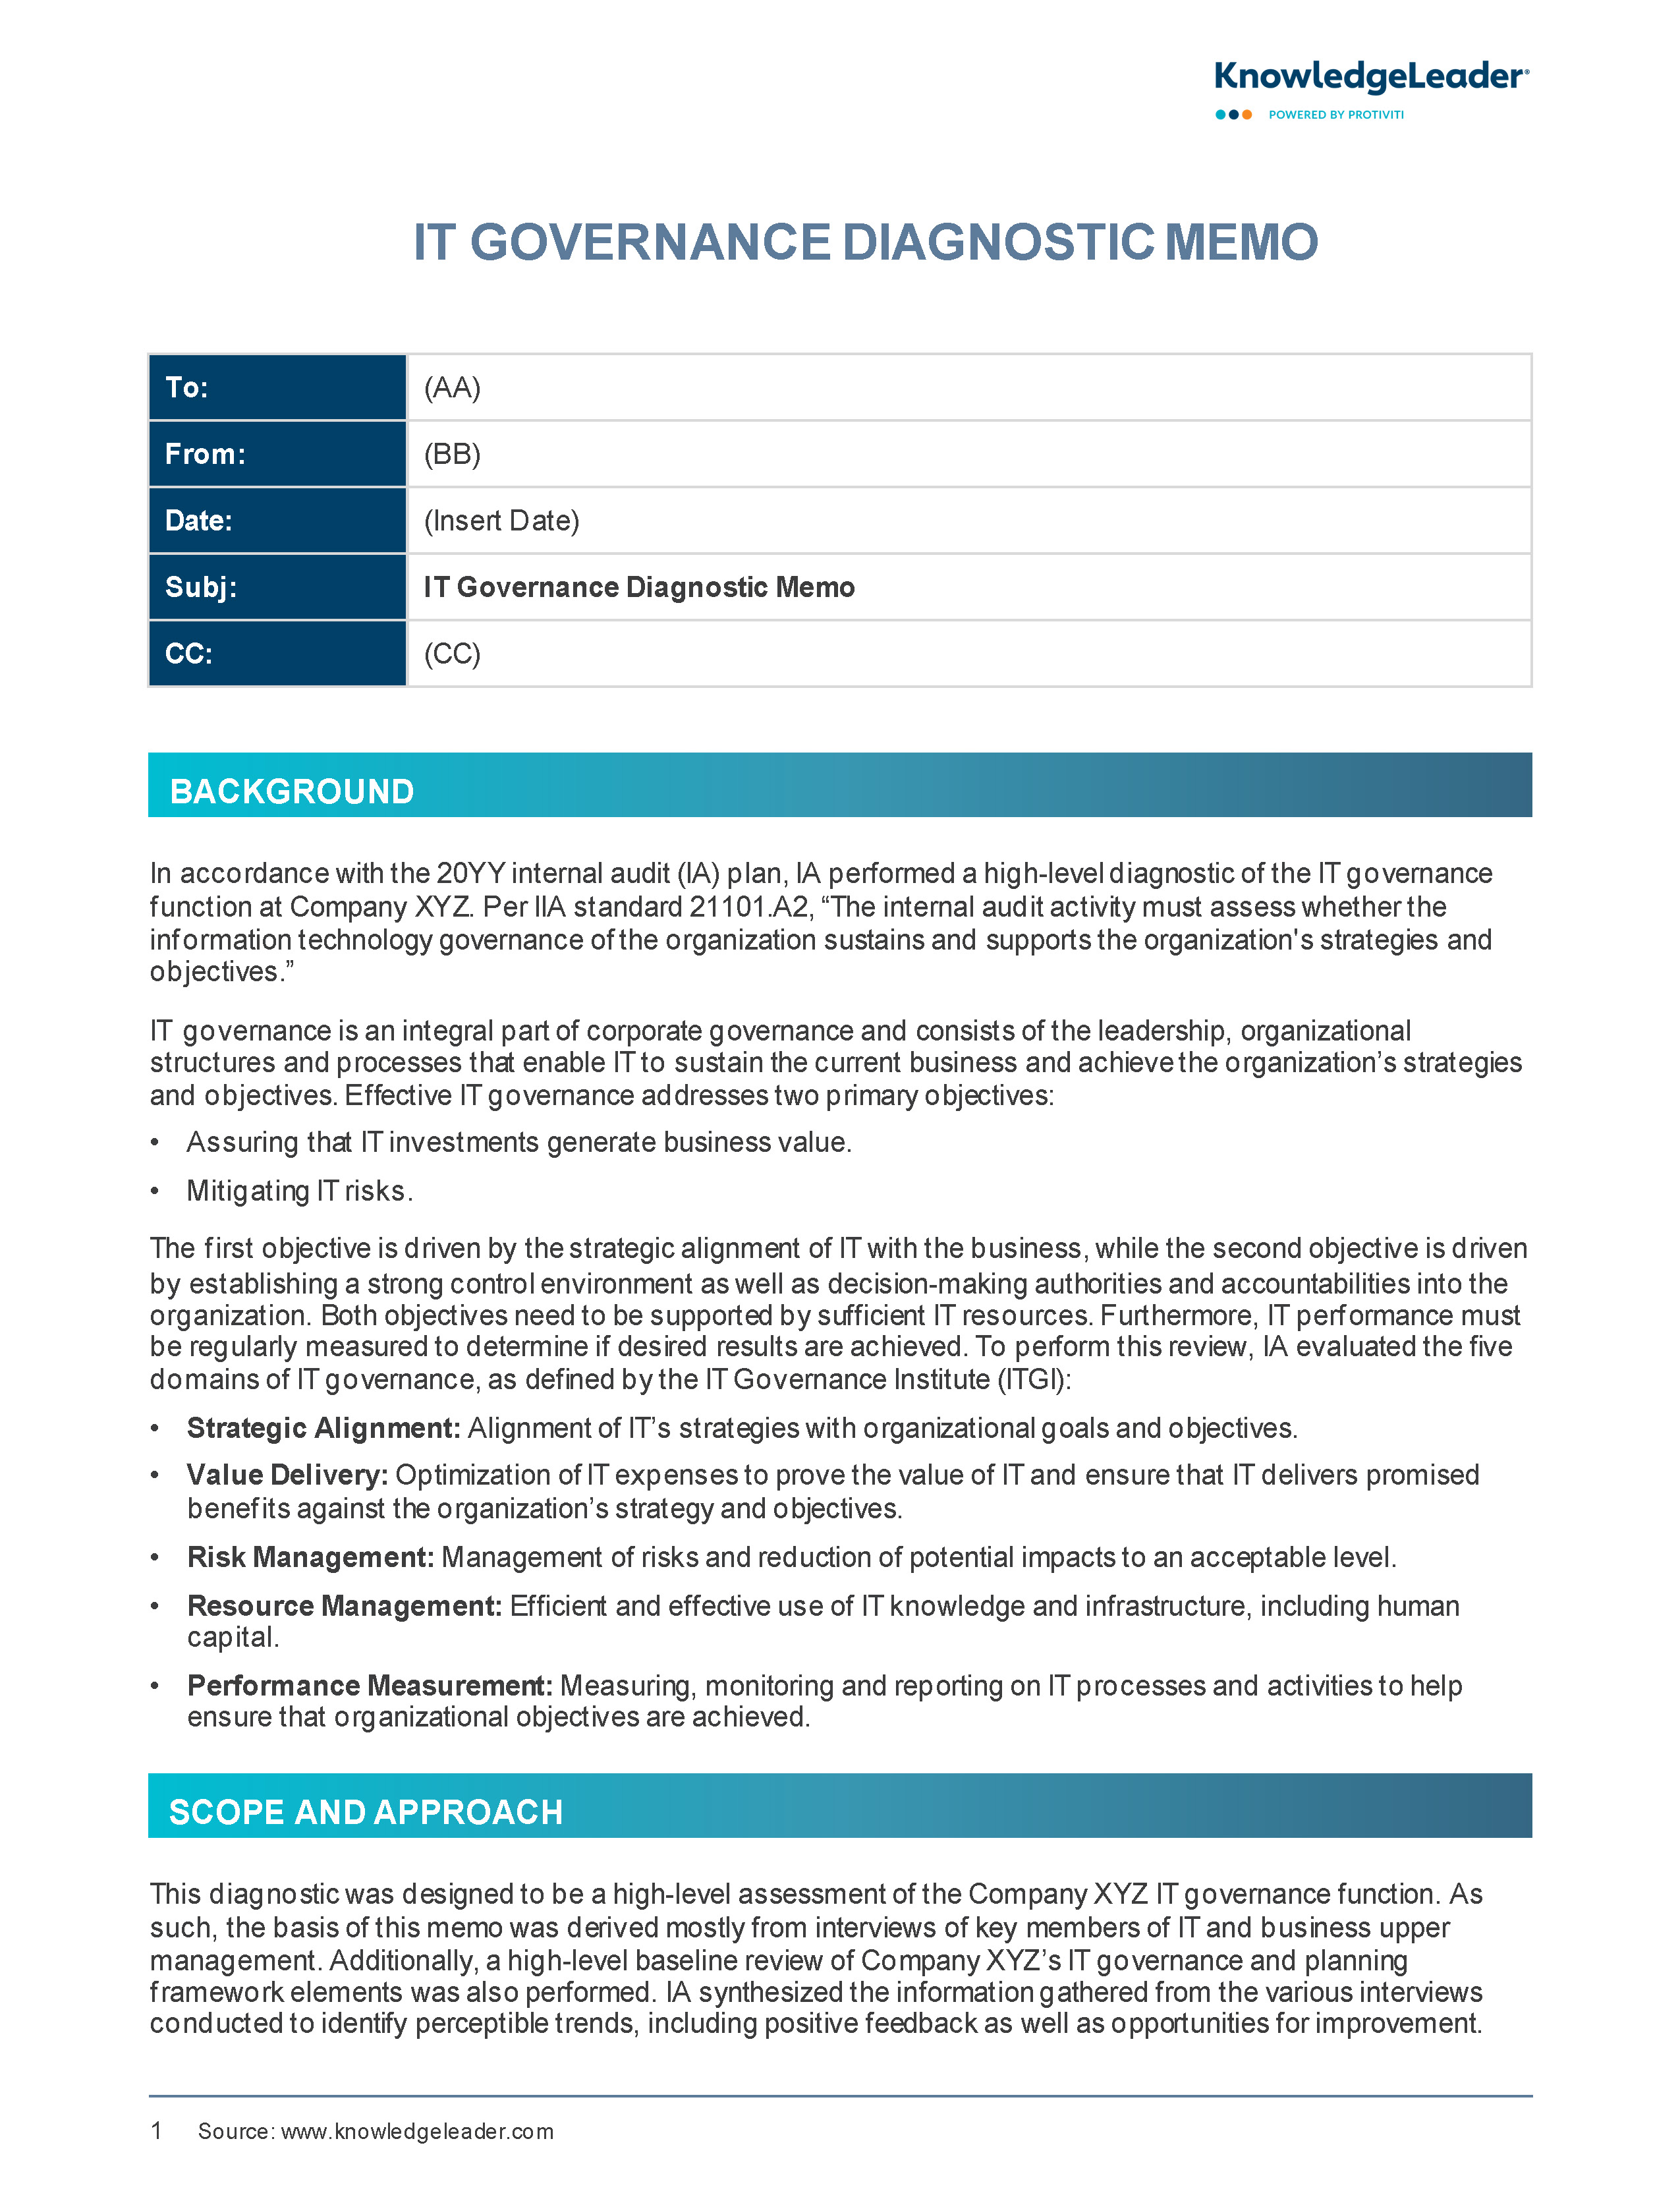 Screenshot of the first page of IT Governance Diagnostic Memo